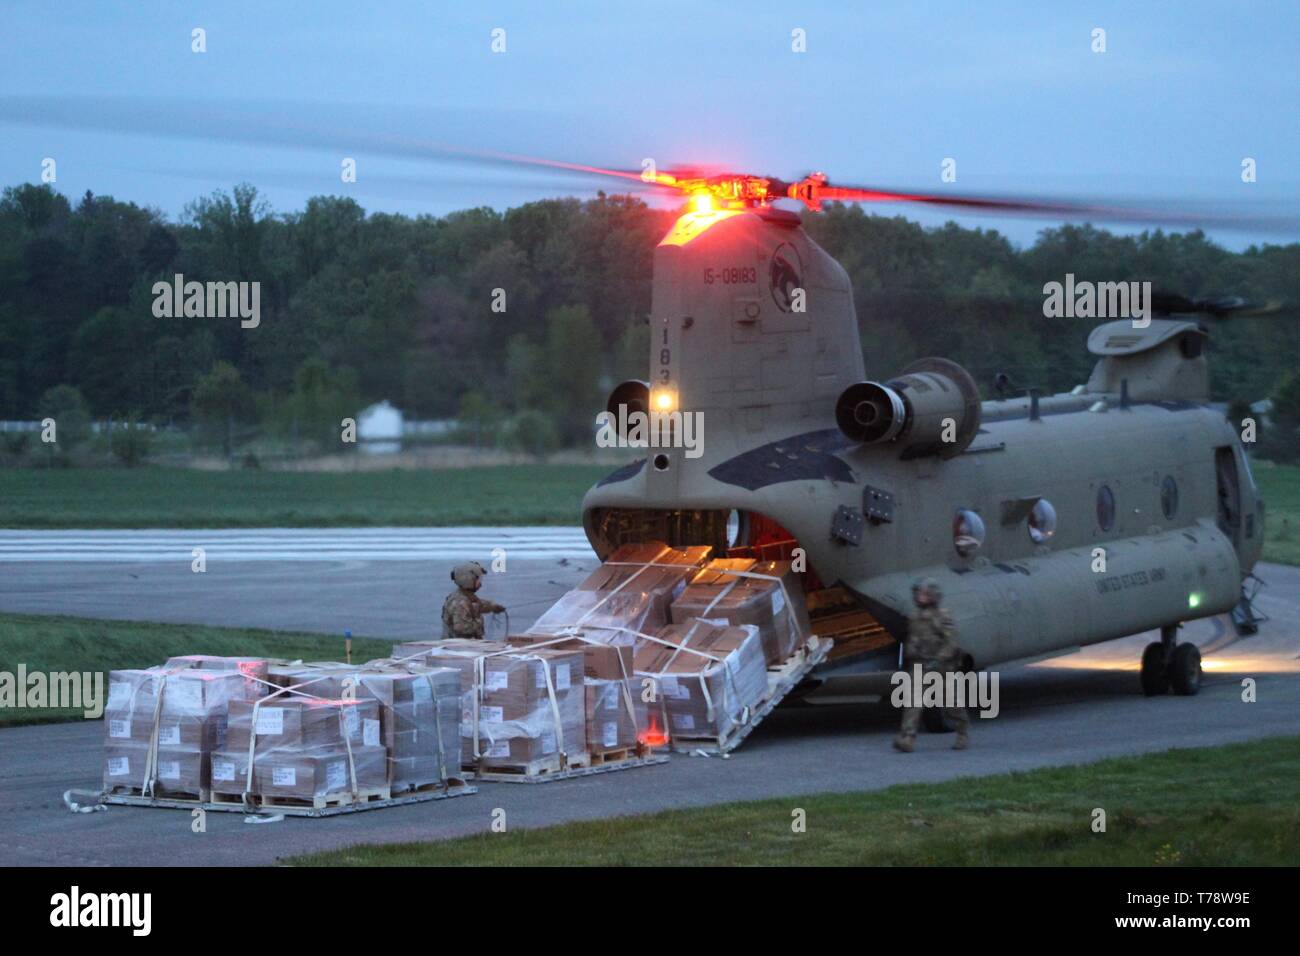 Soldiers in Task Force Aviation, Joint Task Force Civil Support (JTFCS), unload a Chinook to resupply Task Force Operations as part of Exercise Guardian Response, near North Vernon, Ind., May 3, 2019. When directed, JTFCS provides command and control of the 5,200-person Defense Chemical Biological Radiological Nuclear (CBRN) Response Force (DCRF) during a catastrophic crisis in support of civil authorities and the lead federal agency. Vibrant Response/Guardian Response is an annual, combined Command Post Exercise and Field Training Exercise which validates the ability of the DCRF forces to con Stock Photo